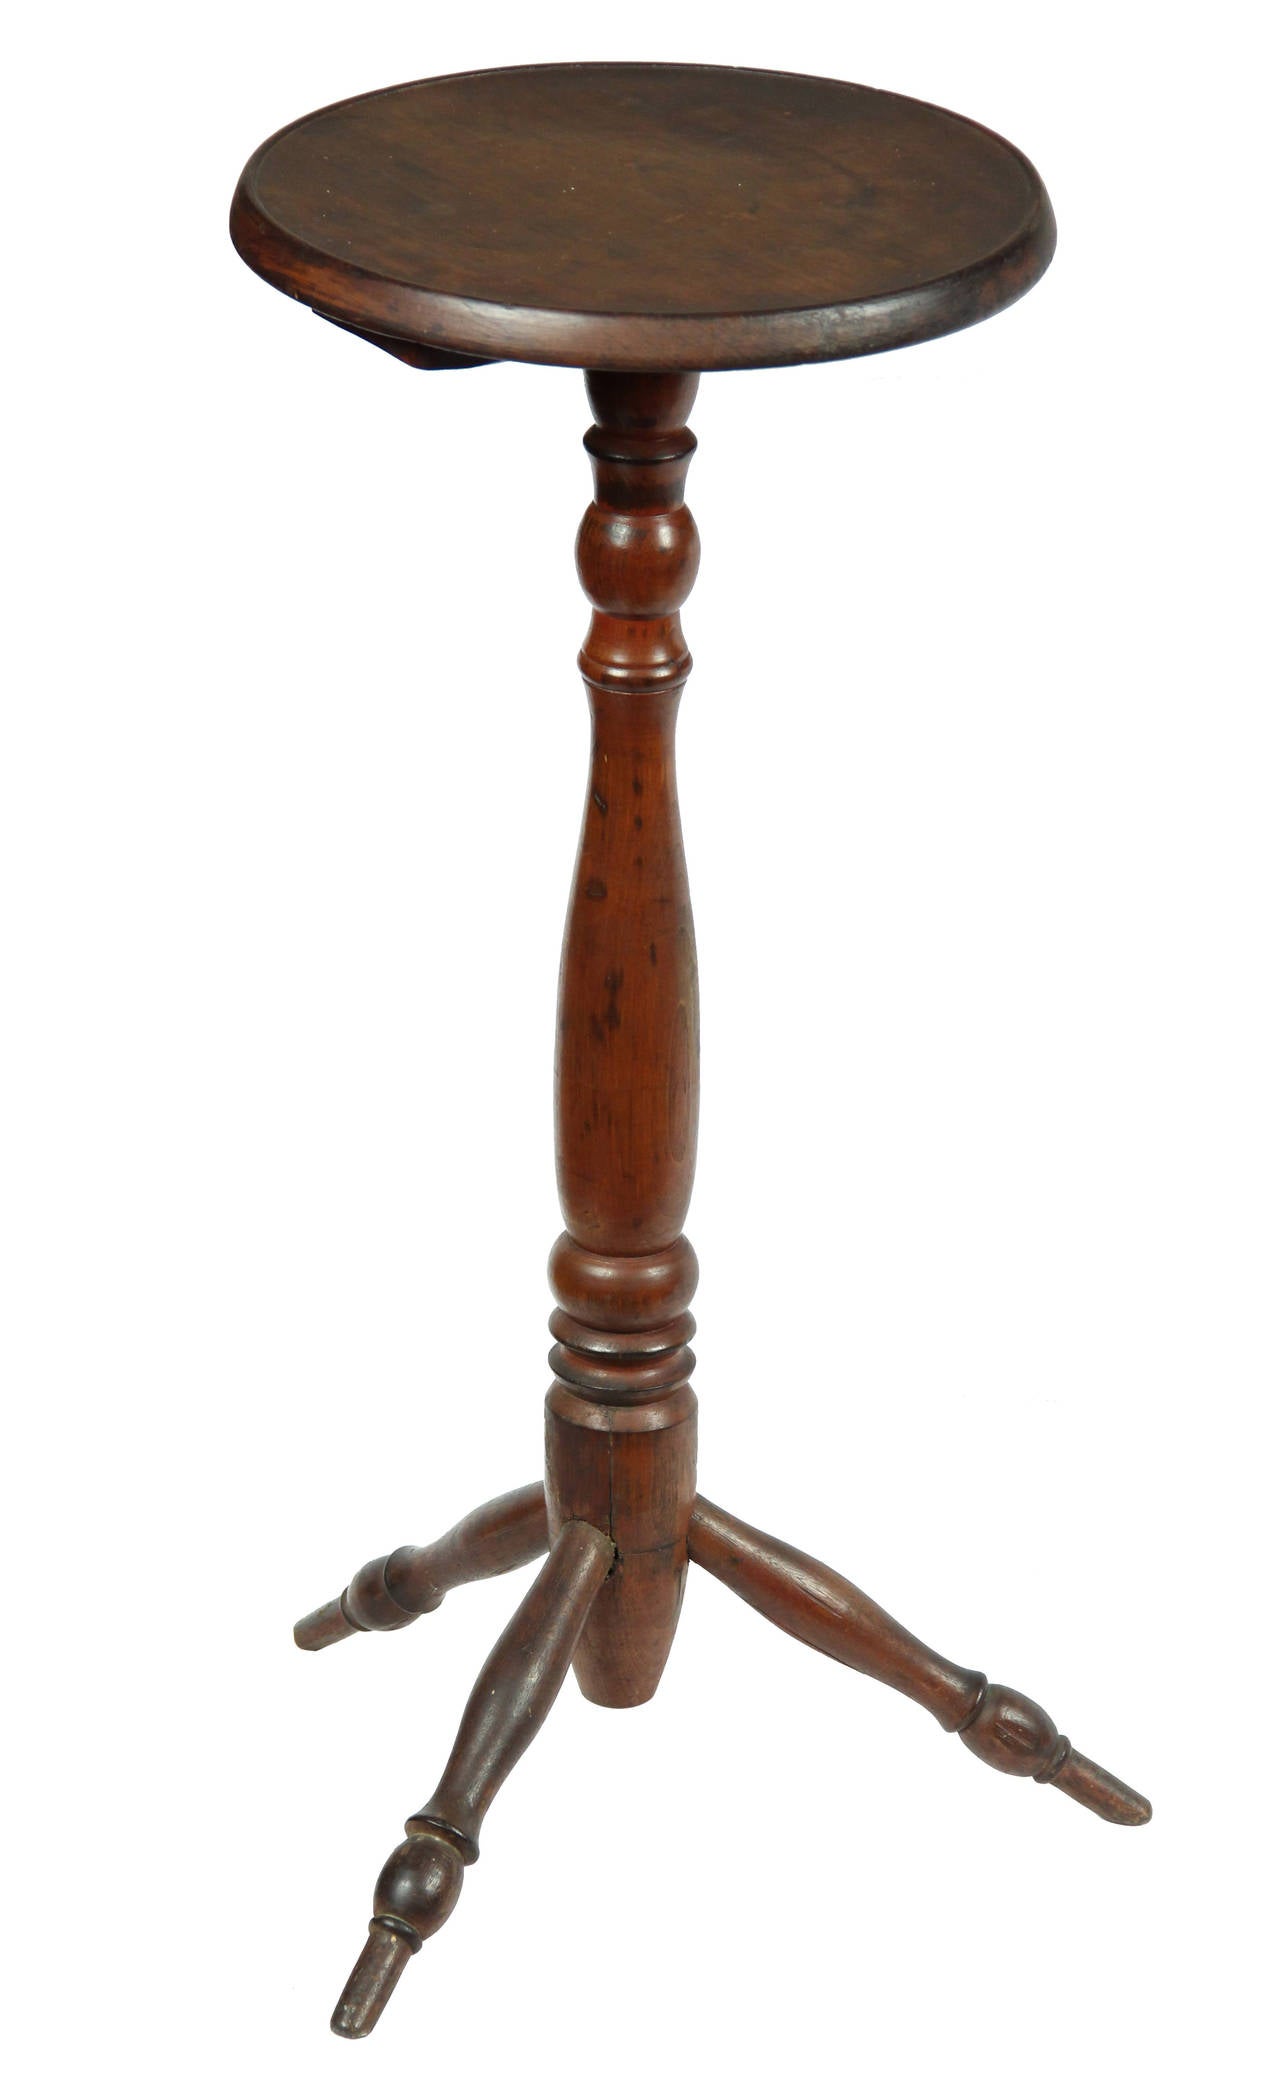 This candle stand is a seldom seen form and this example is a fine example of its design style. For a related candle Stand, see below for a scan from Worldly Goods, Jack L. Lindsey. We have another of this type, see sw01568. These tables are quite